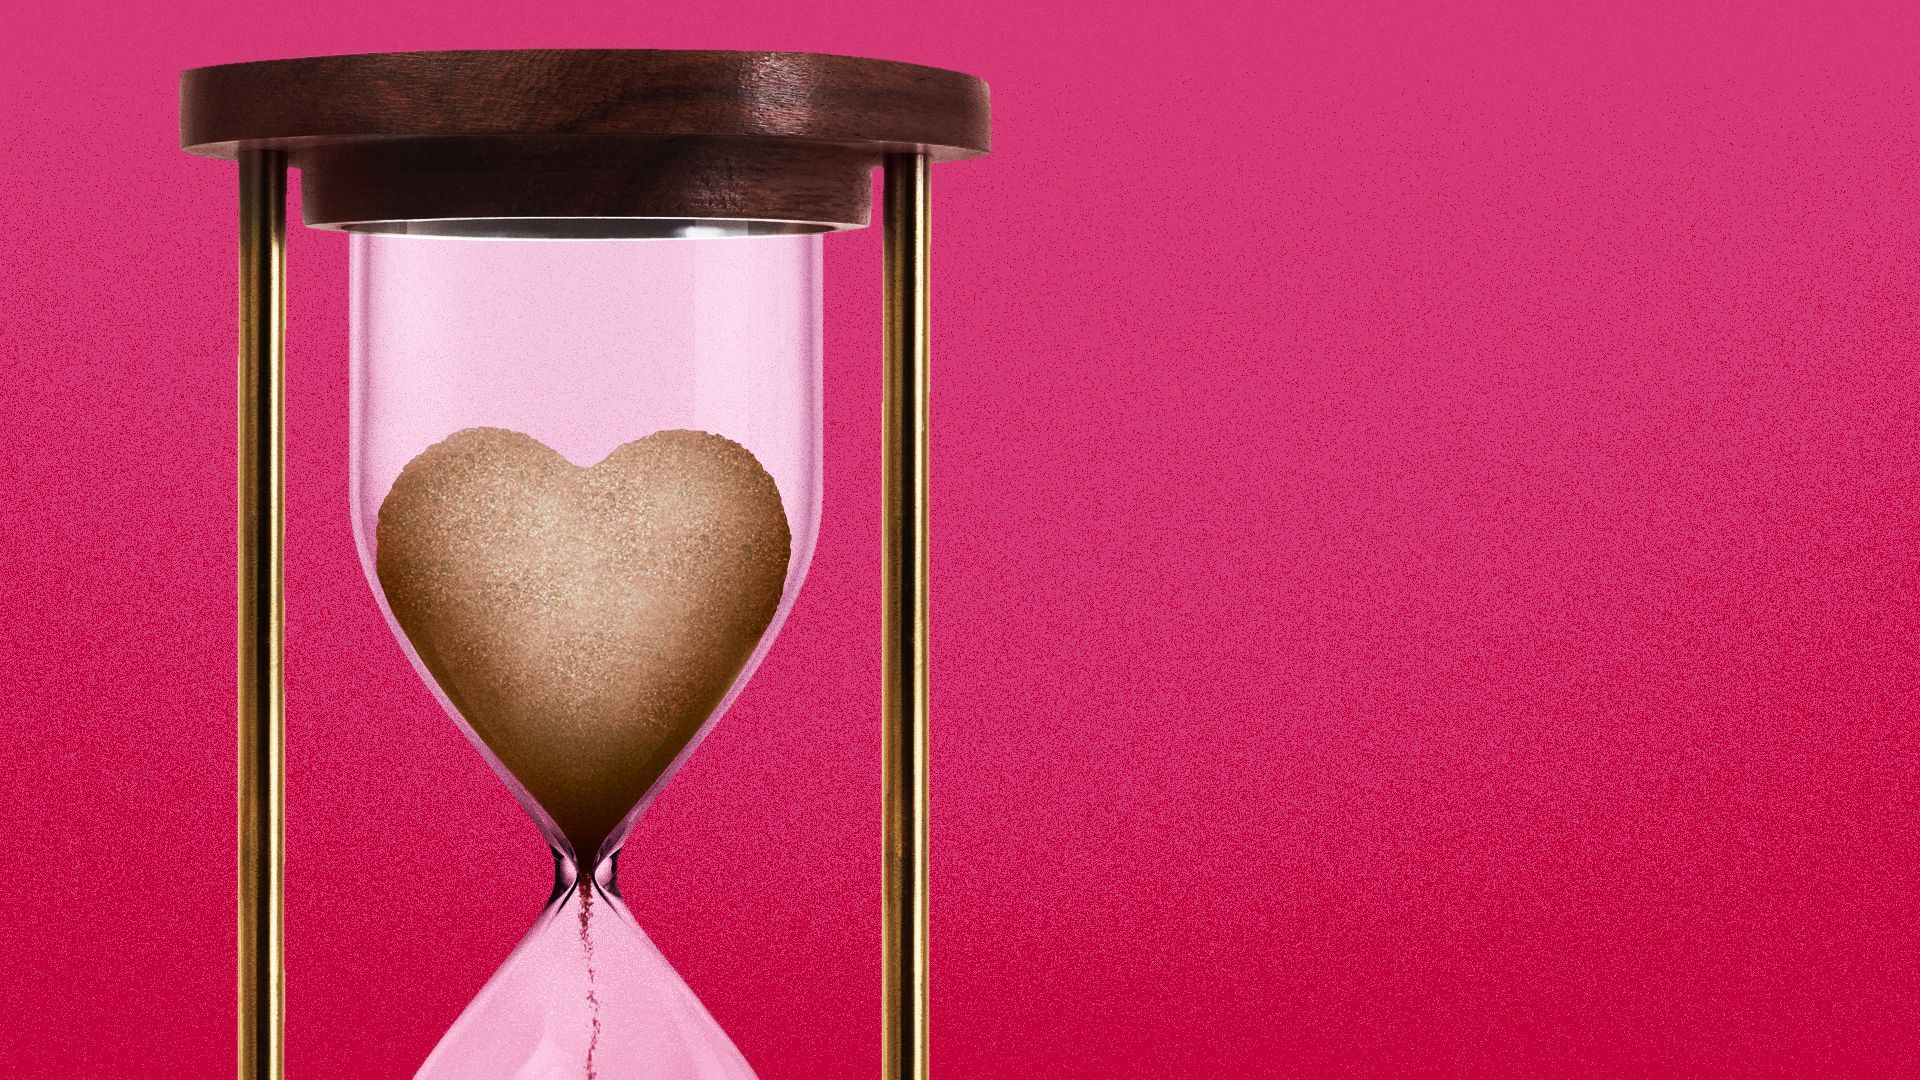 Illustration of an hourglass with the sand shaped like a heart. 